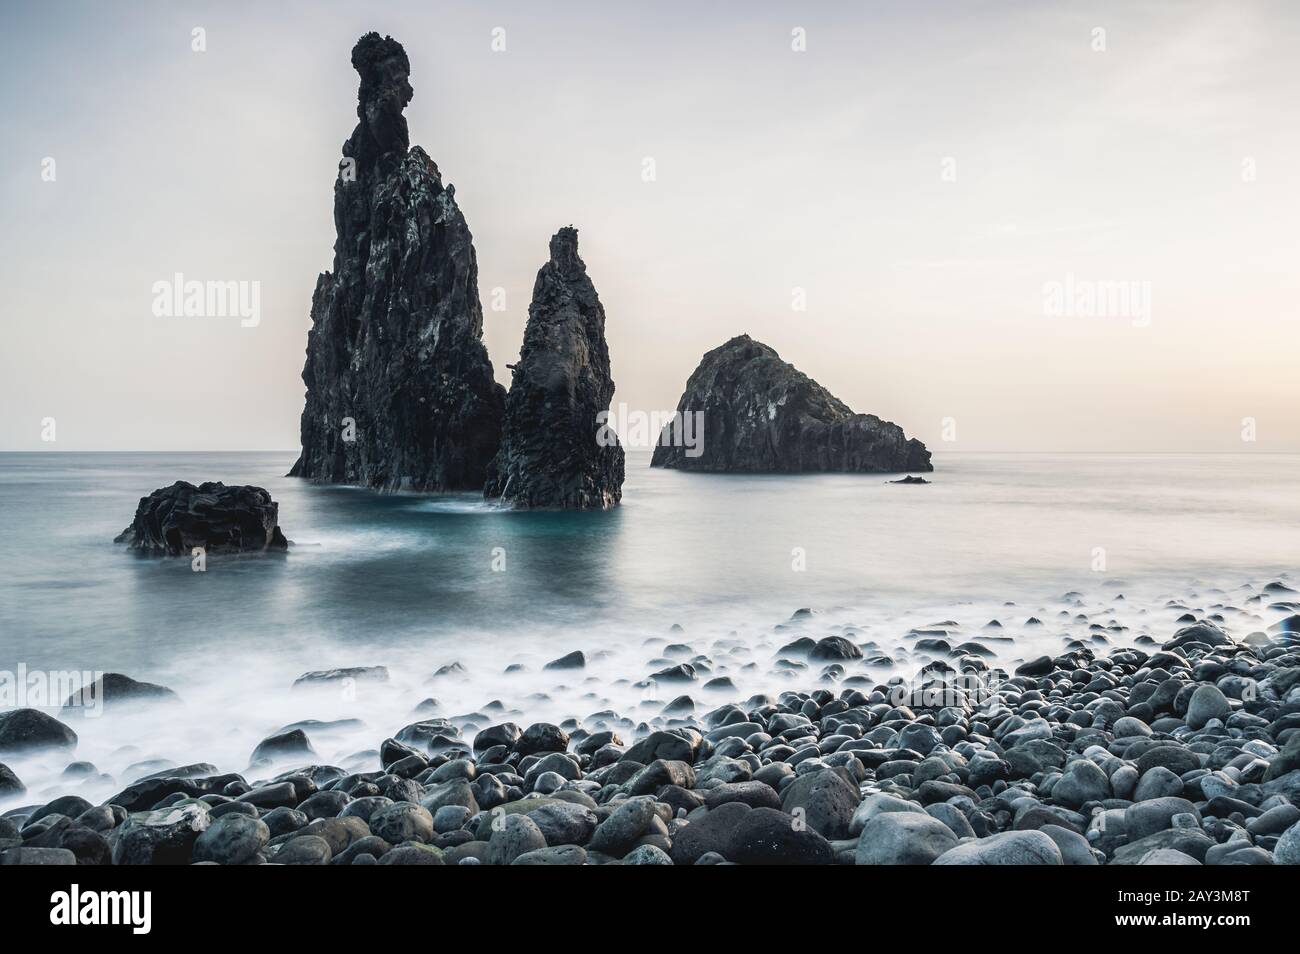 Rock formations in sea Banque D'Images